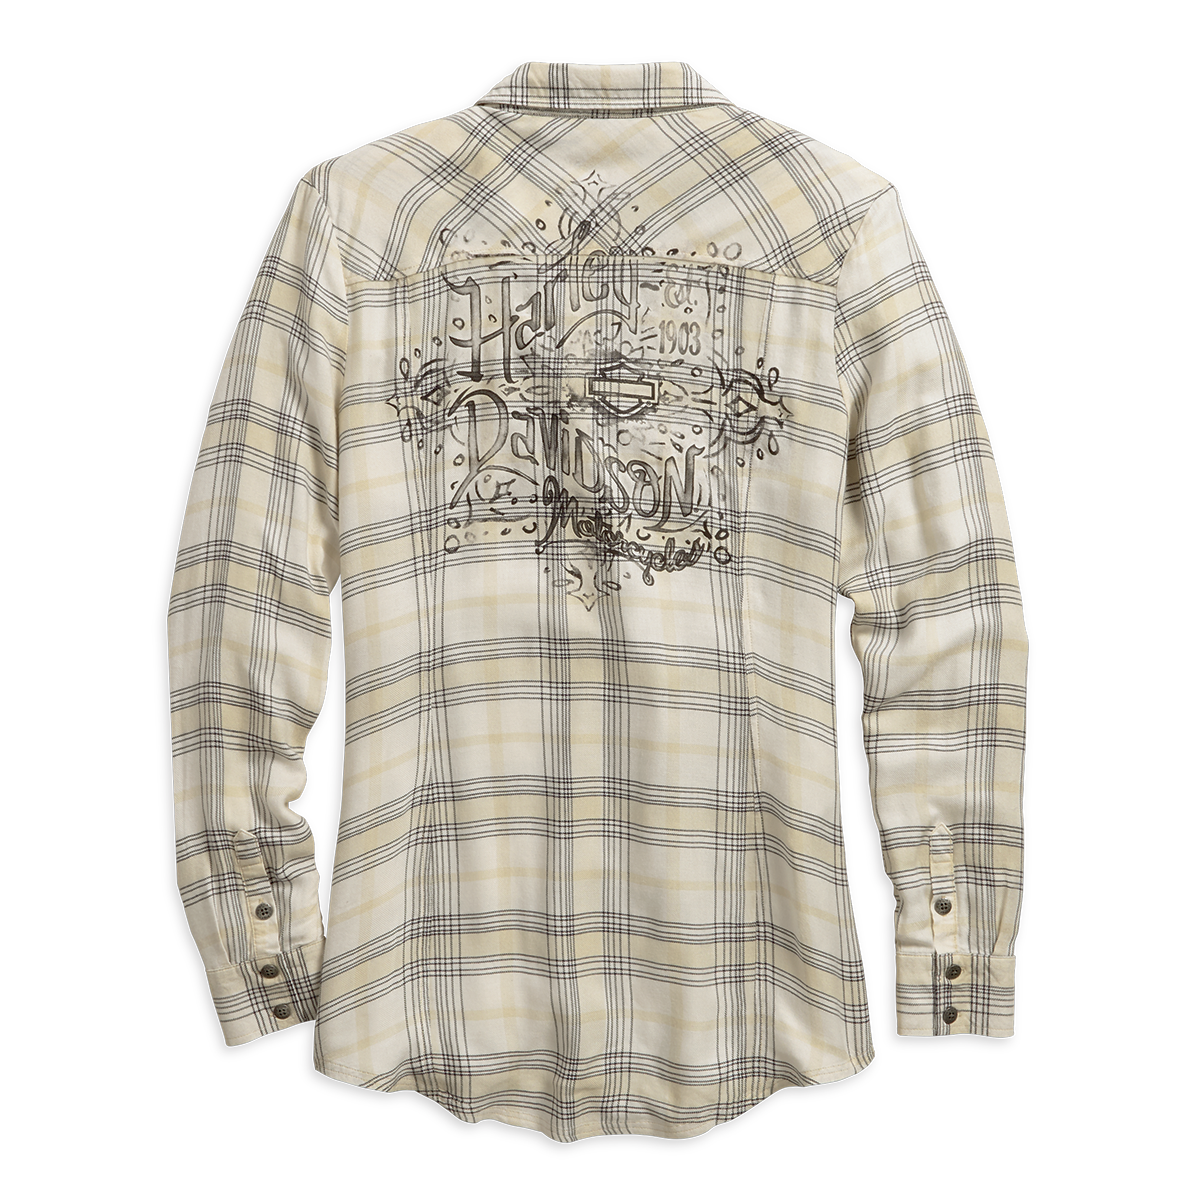 Harley-Davidson Relaxed Fit Plaid Women's Shirt